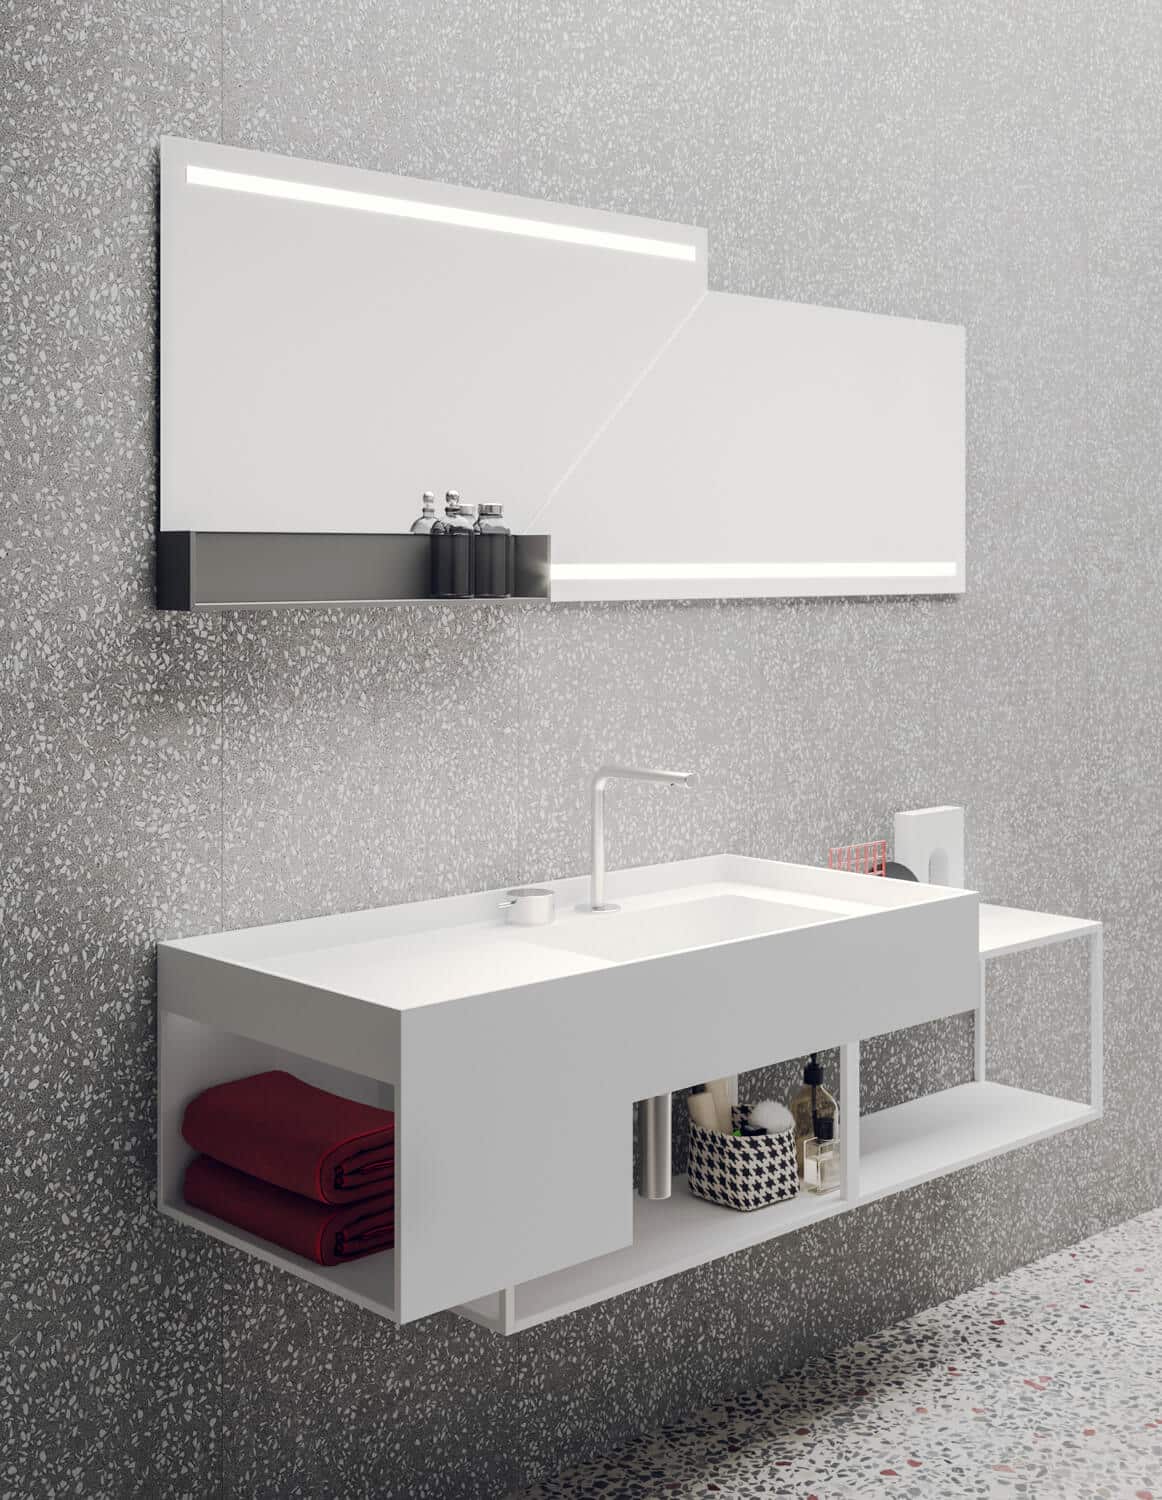 Open storage can take many shapes in the Libera+ bathrooms.